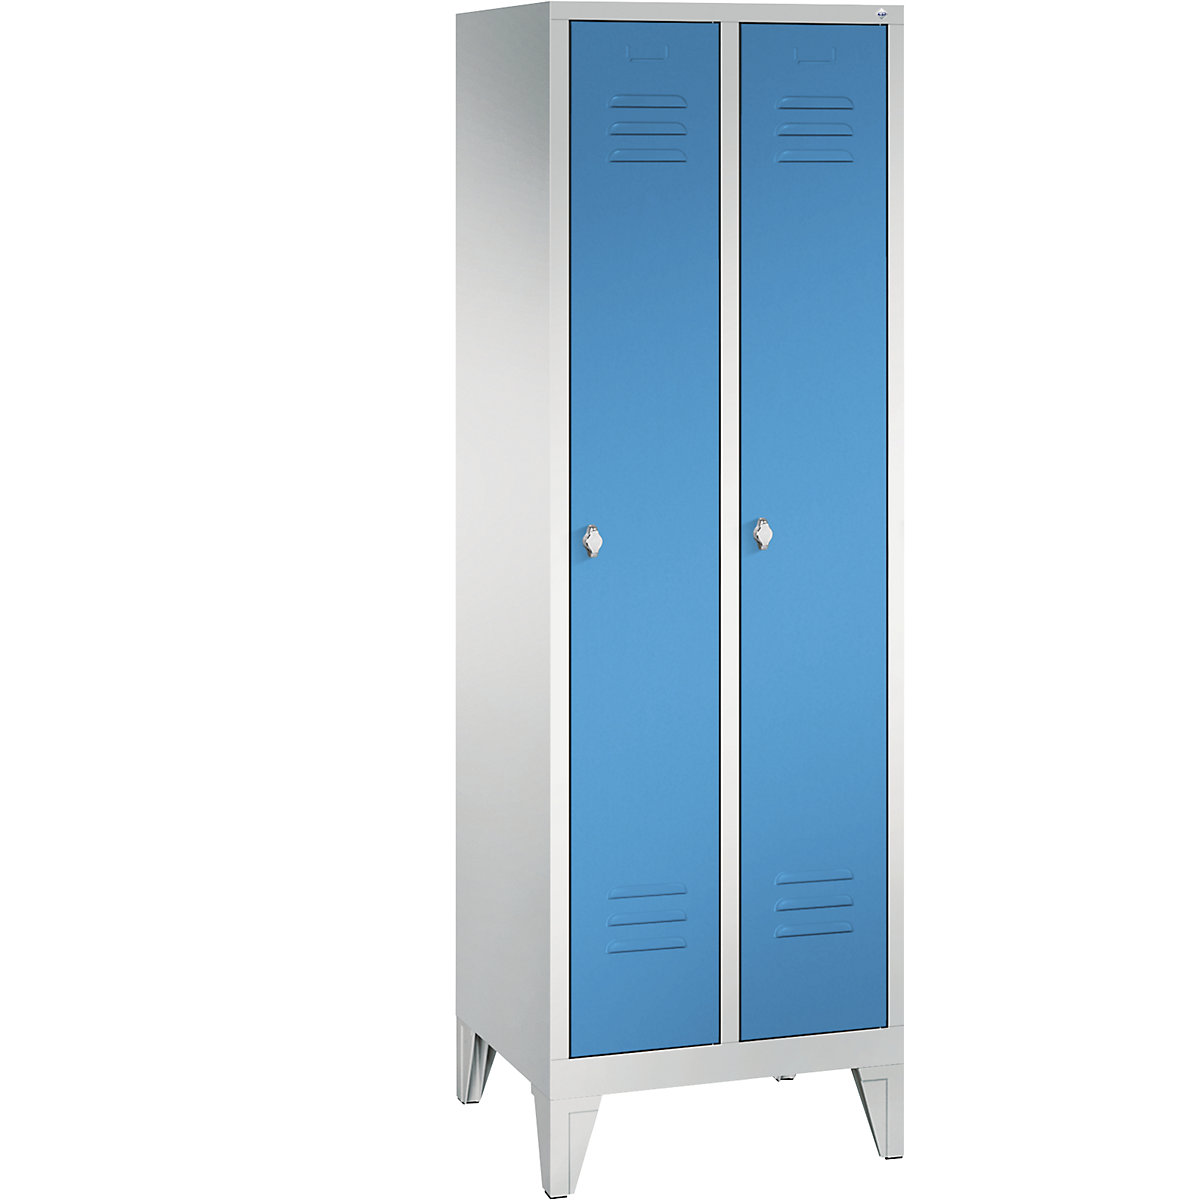 CLASSIC storage cupboard with feet – C+P, 2 compartments, compartment width 300 mm, light grey / light blue-9